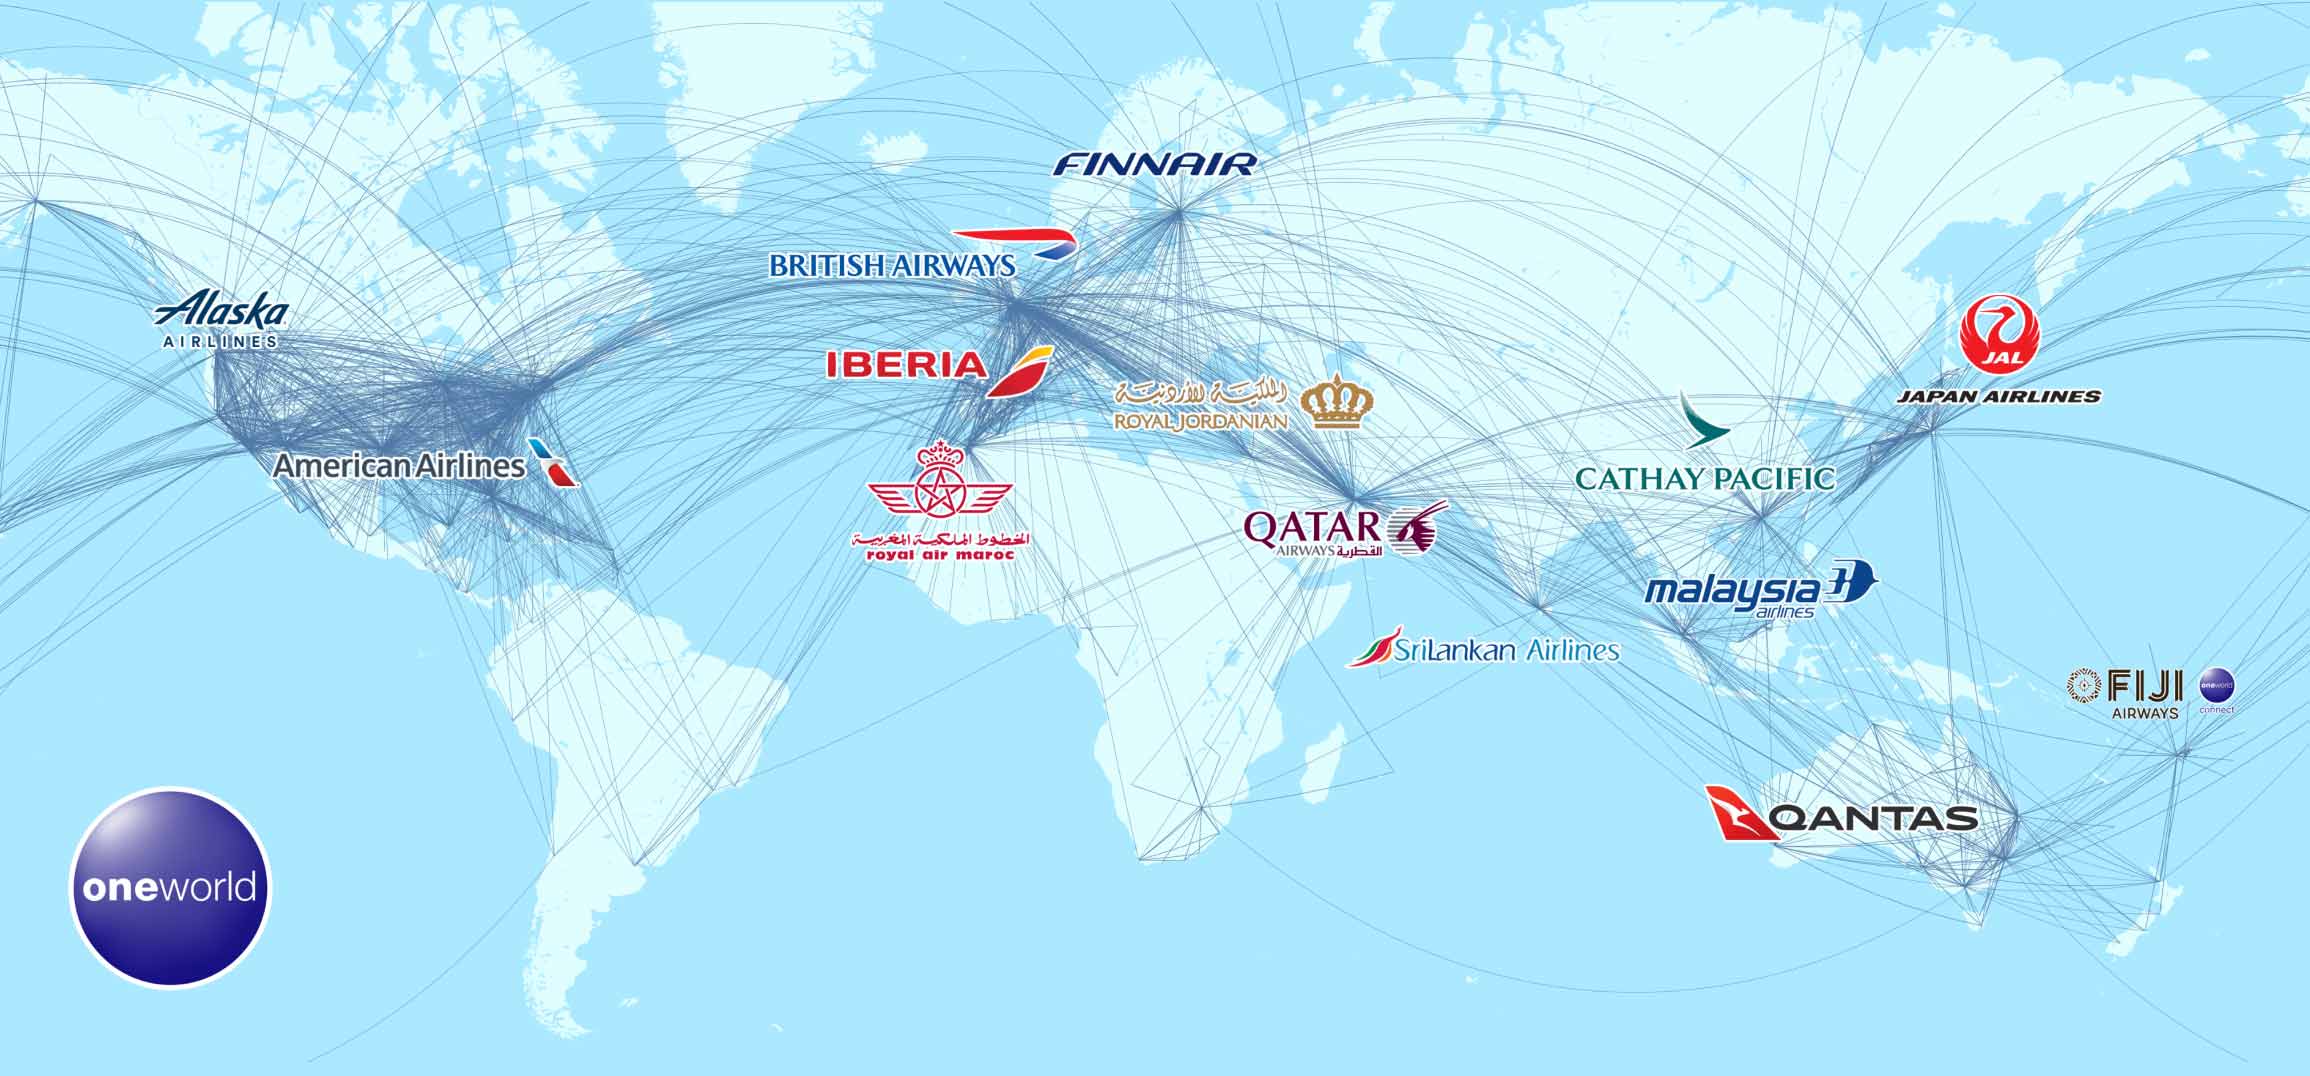 Map of the world that shows the routes that the oneworld Alliance Partners fly.